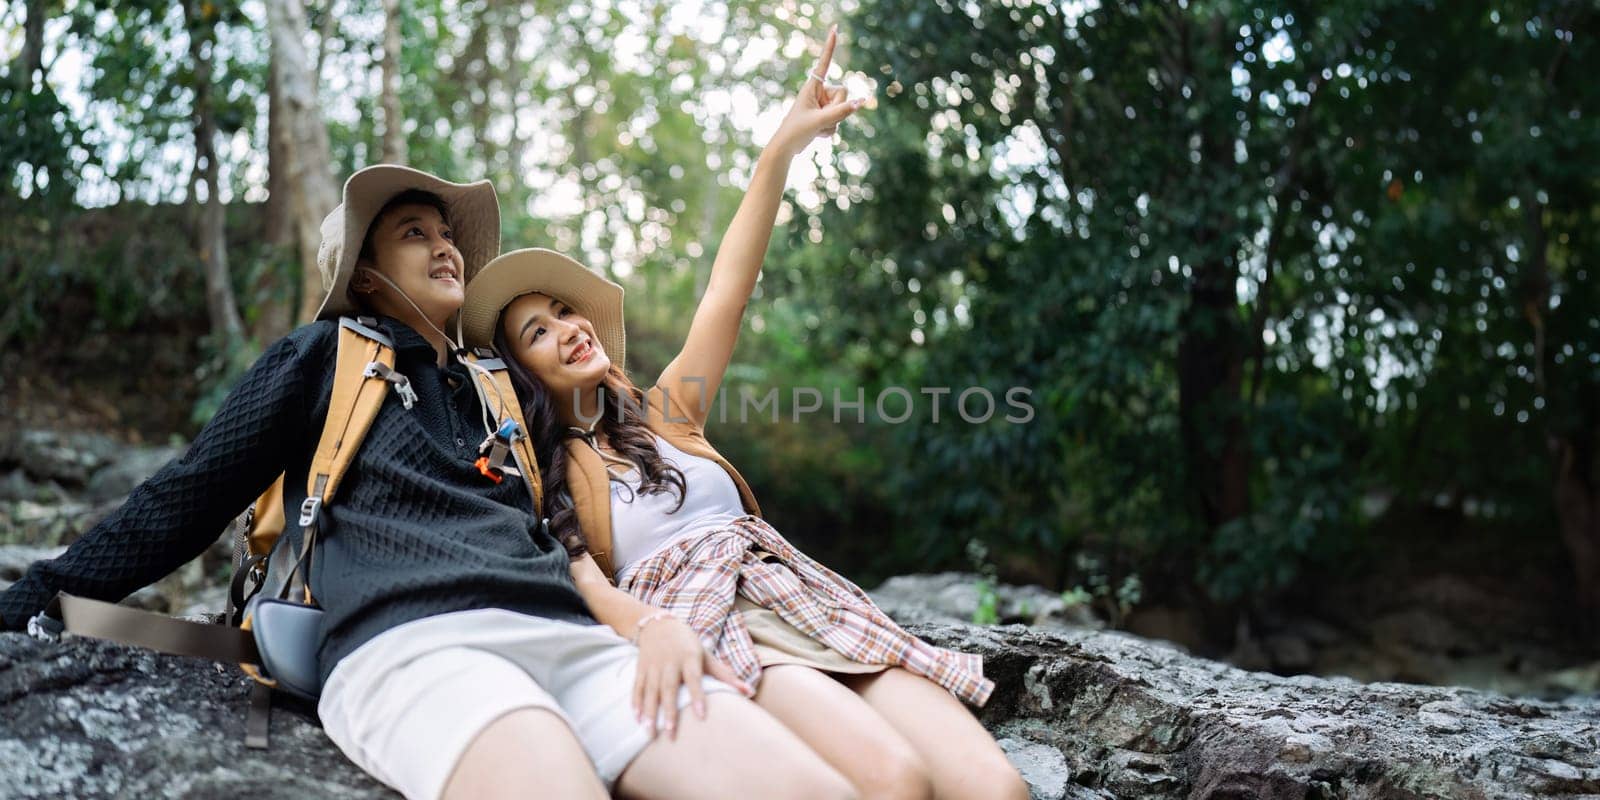 Lesbian couple relaxing together on rock at a hiking trail While traveling together on a hiking trail by itchaznong